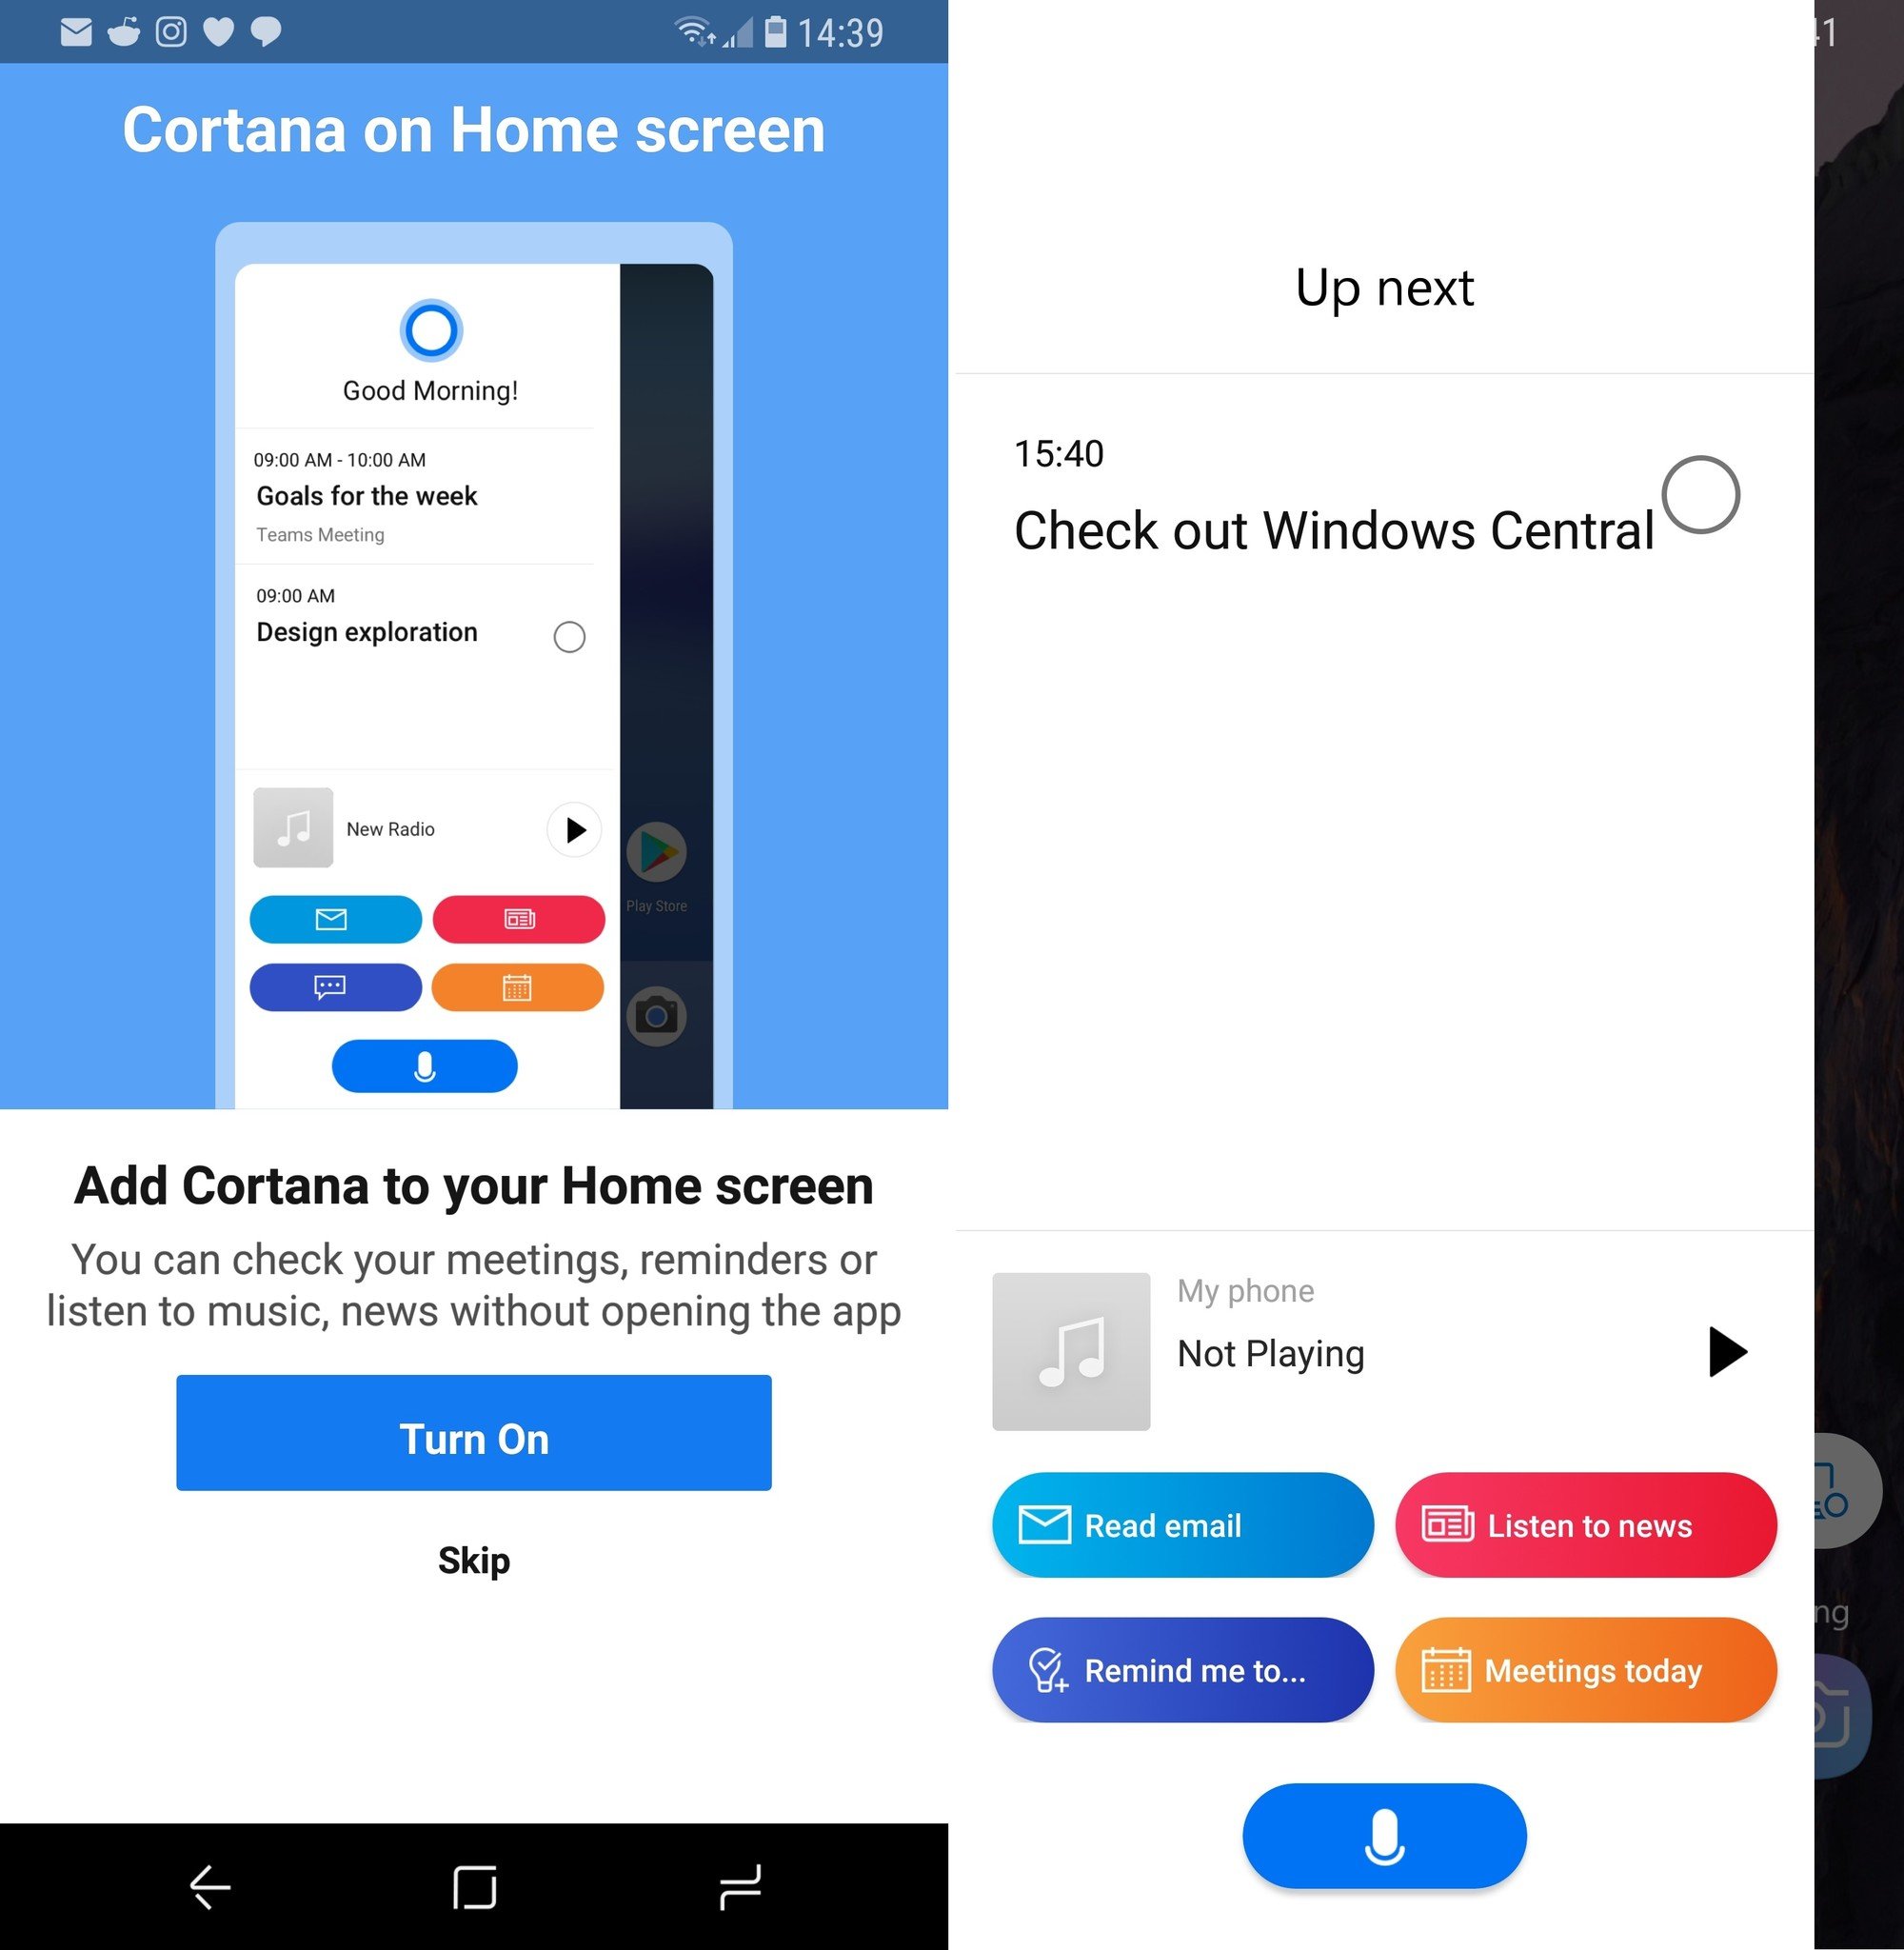 Cortana app for Android updated with new home screen UI and To Do support - OnMSFT.com - March 7, 2019